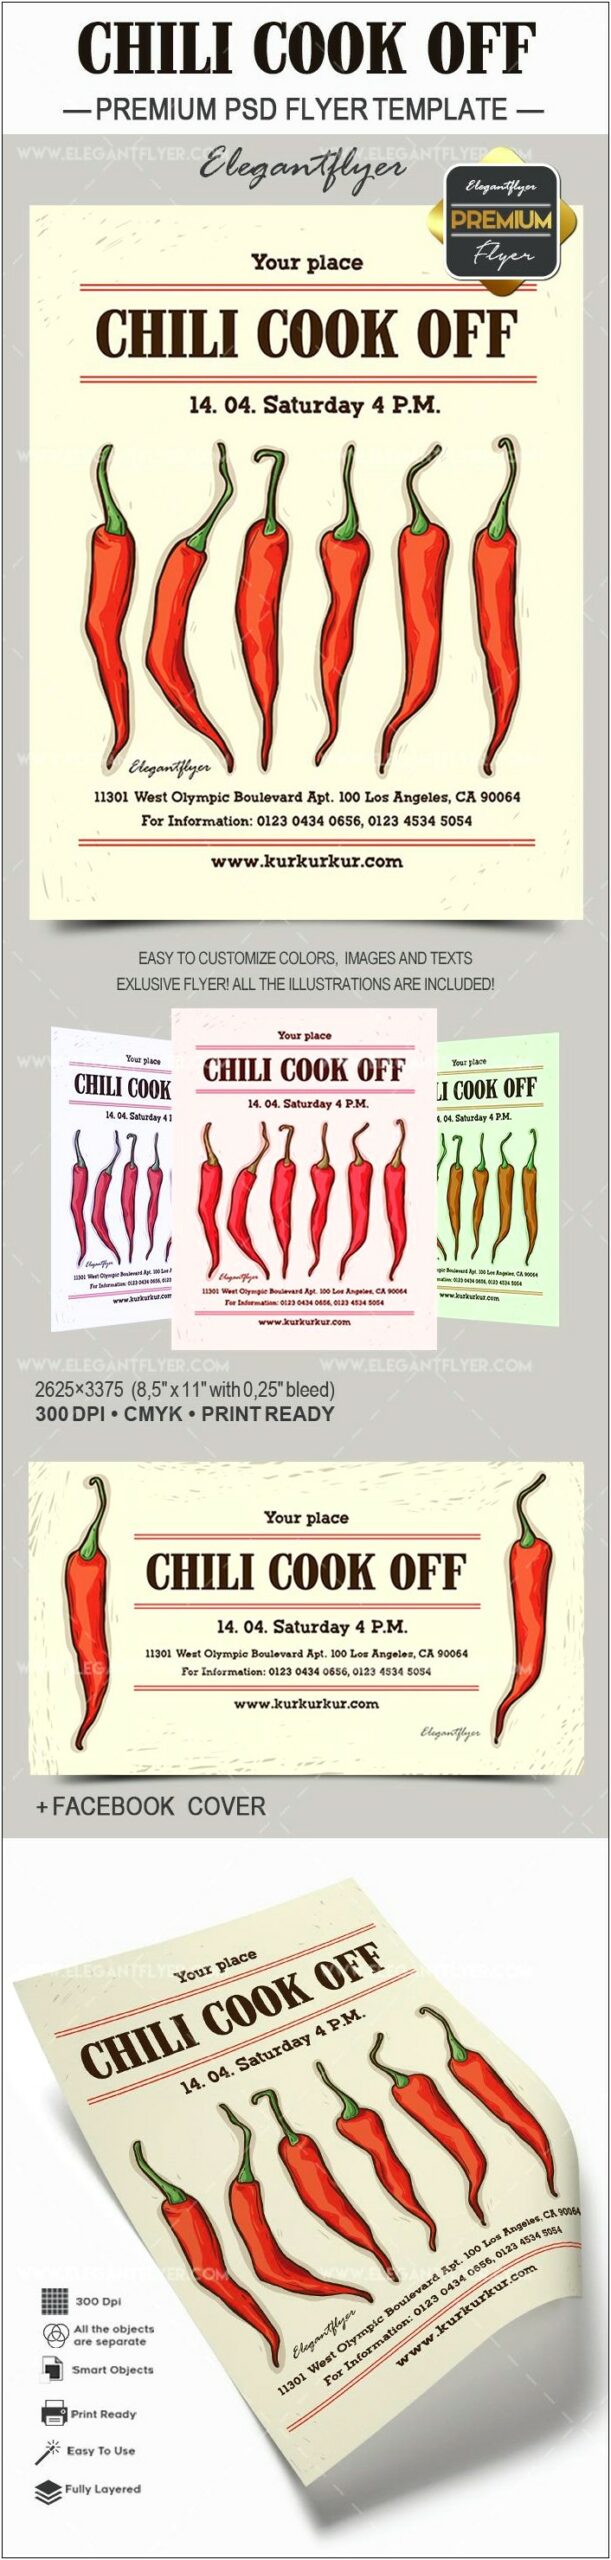 Free Chili Cook Off Flyer Templates